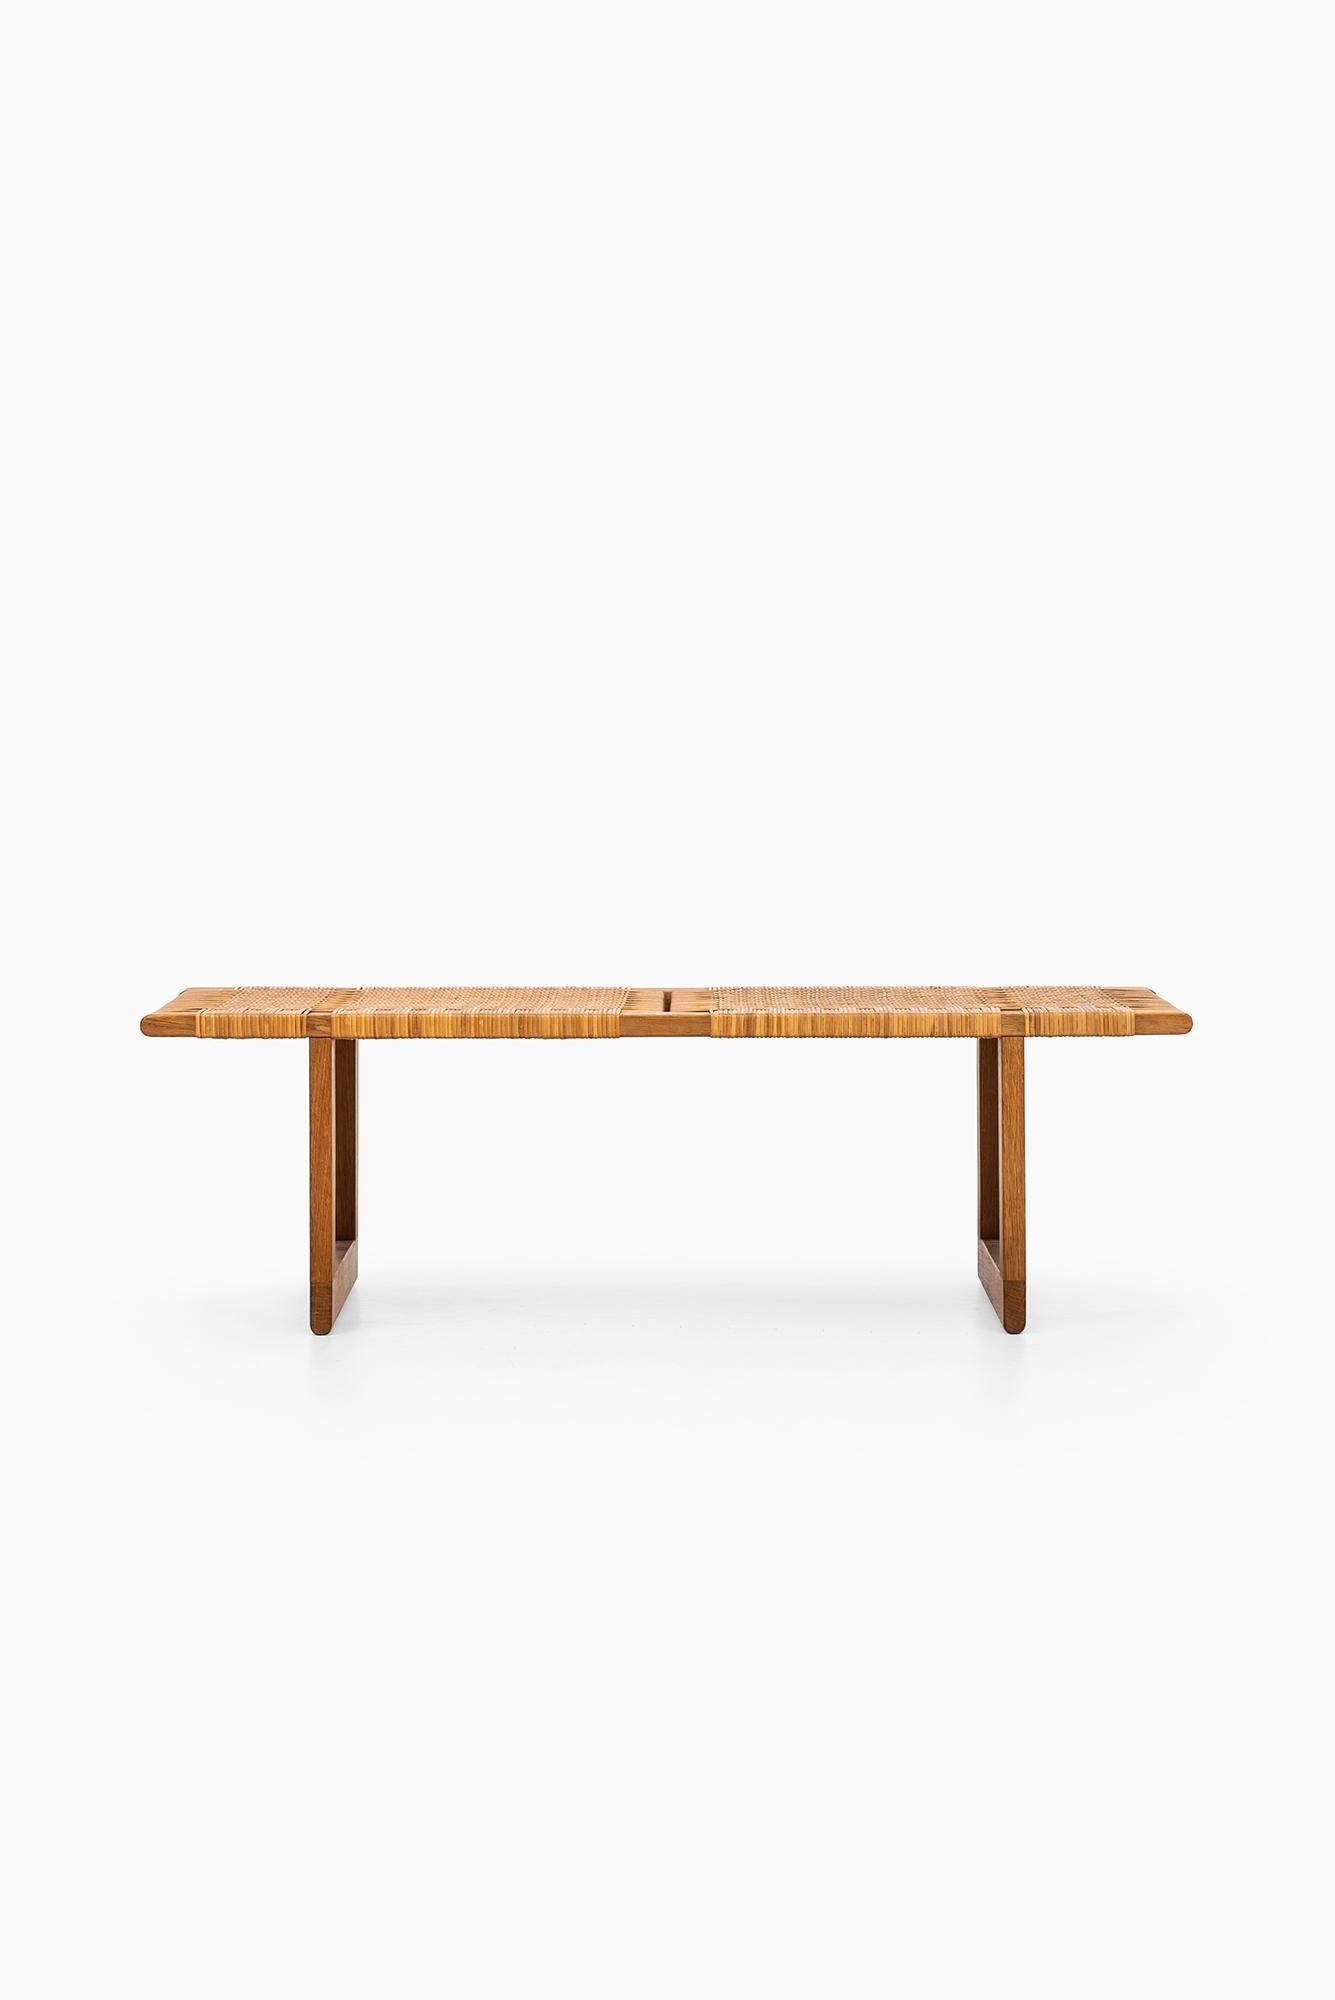 Very rare bench in oak and cane designed by Børge Mogensen. Produced by Erhard Rasmussen in Denmark.